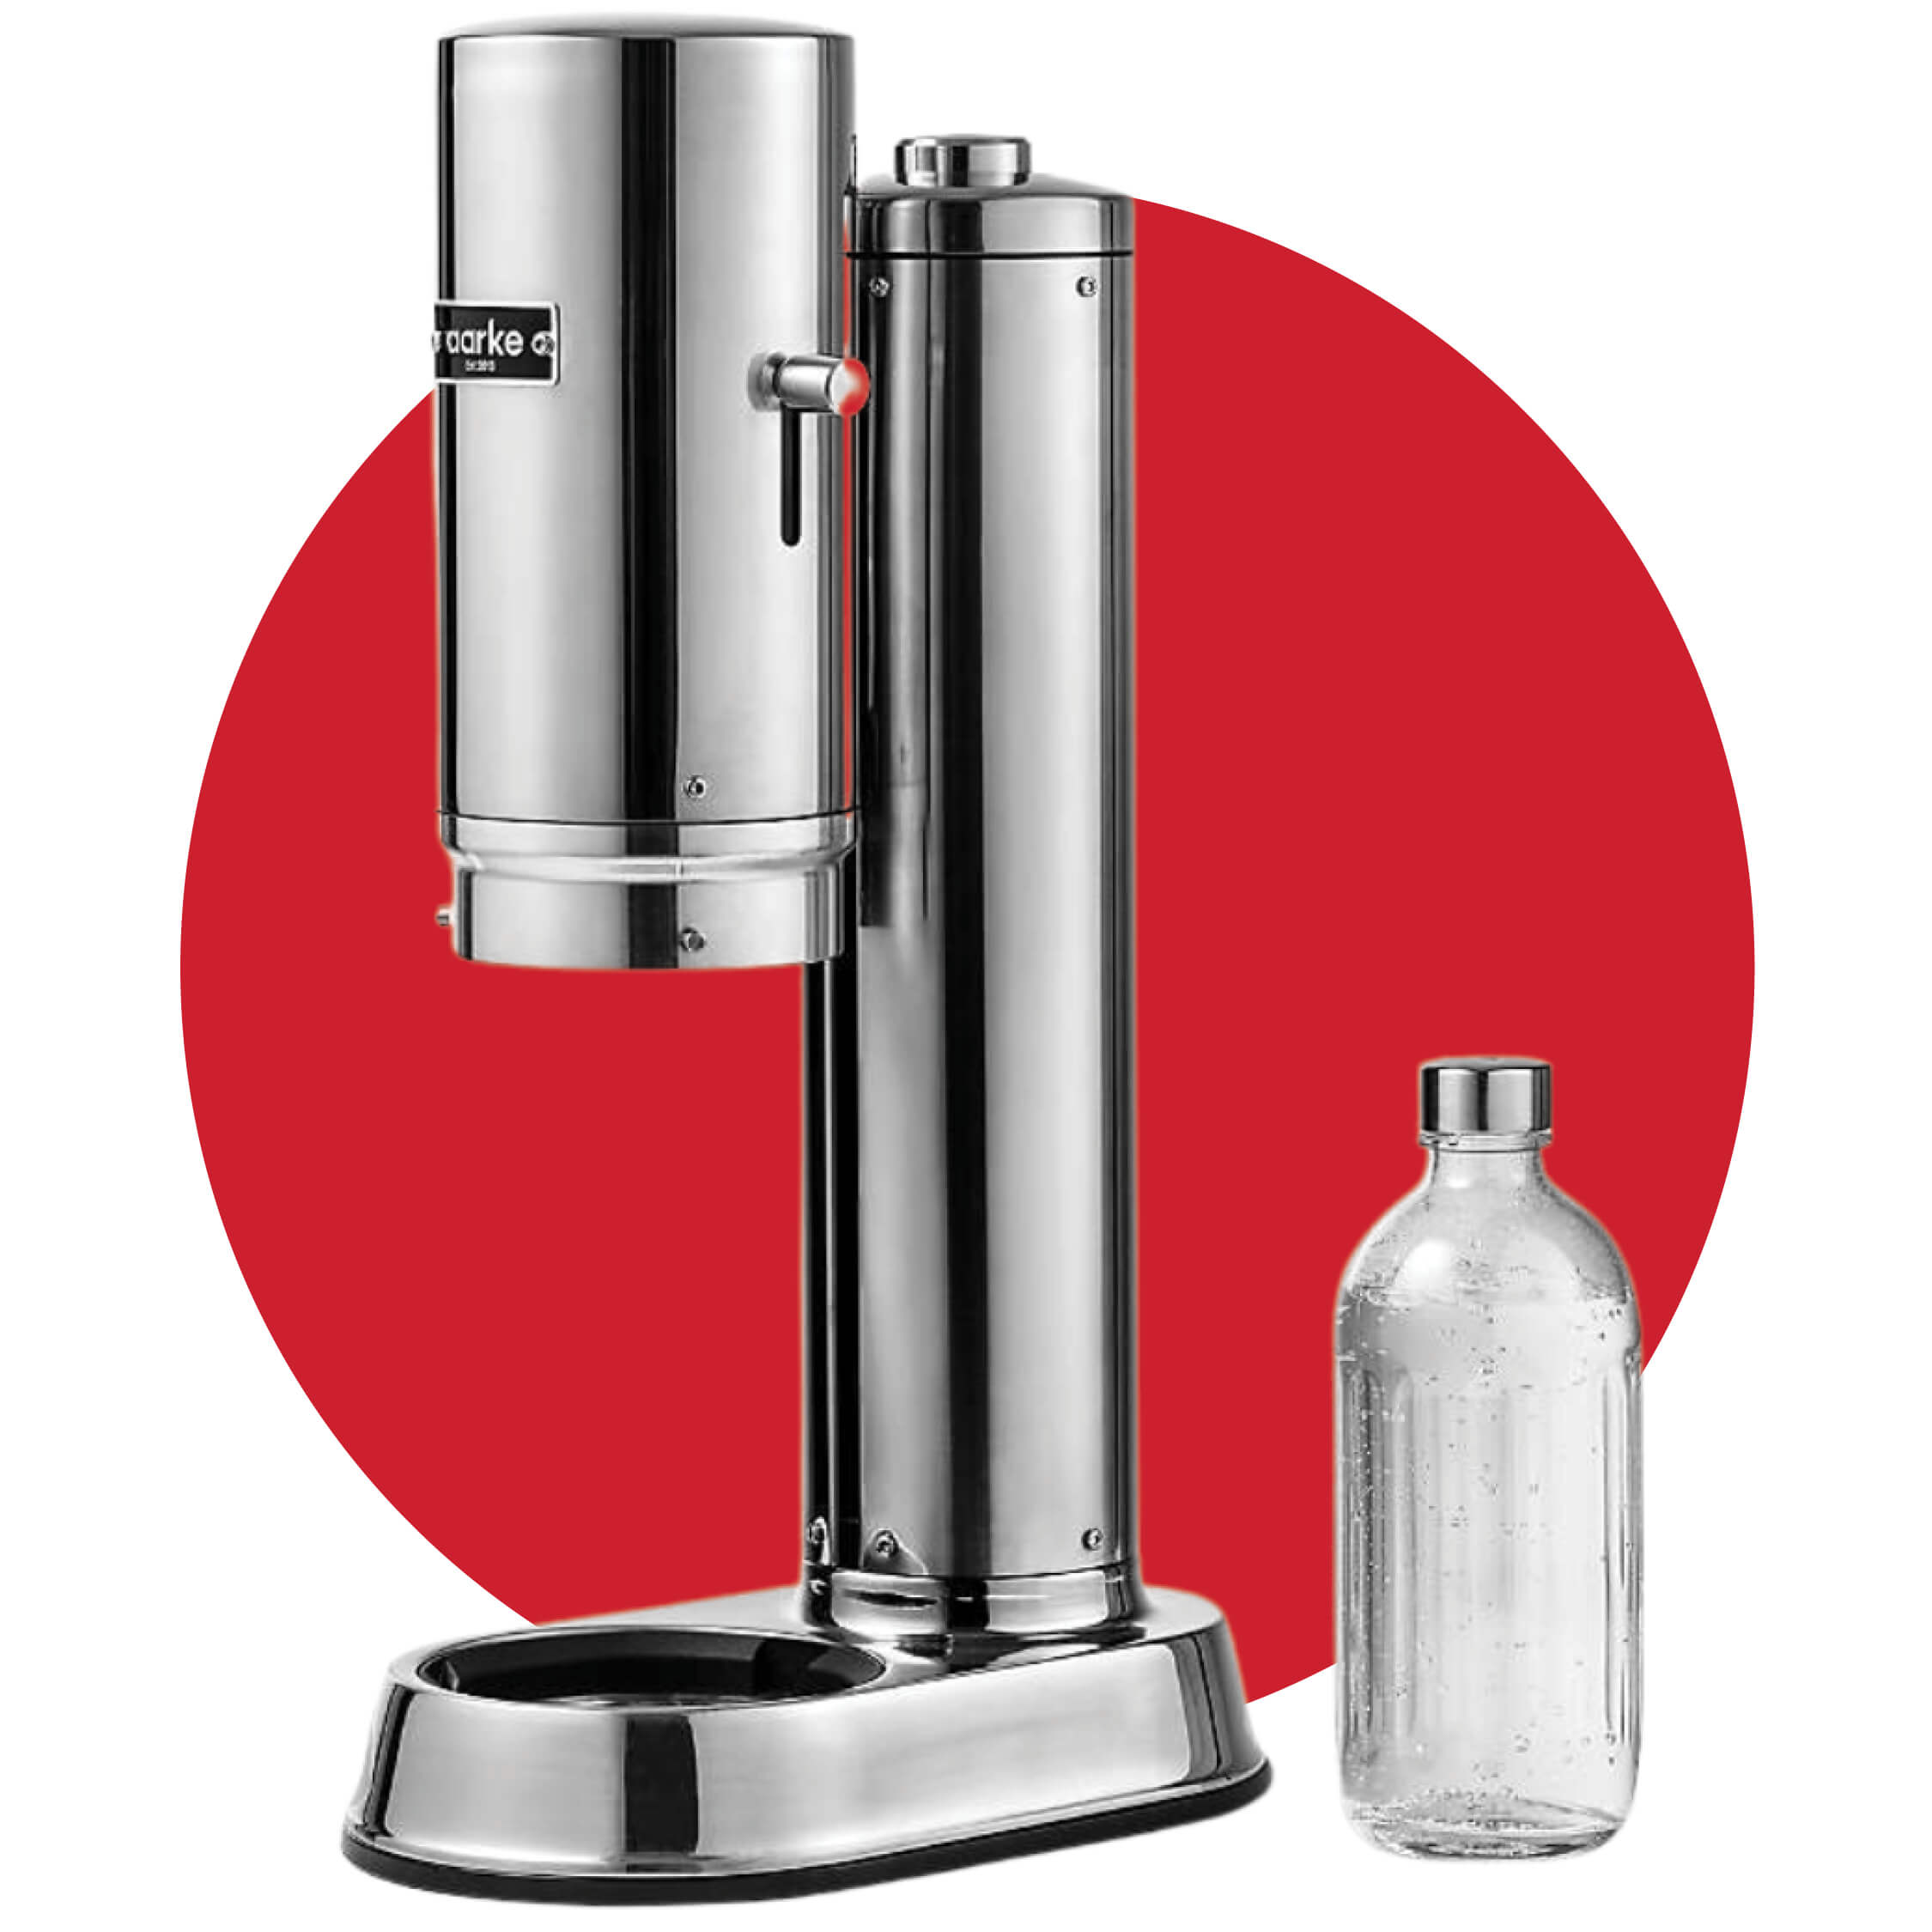 A silver soda maker over a red circle